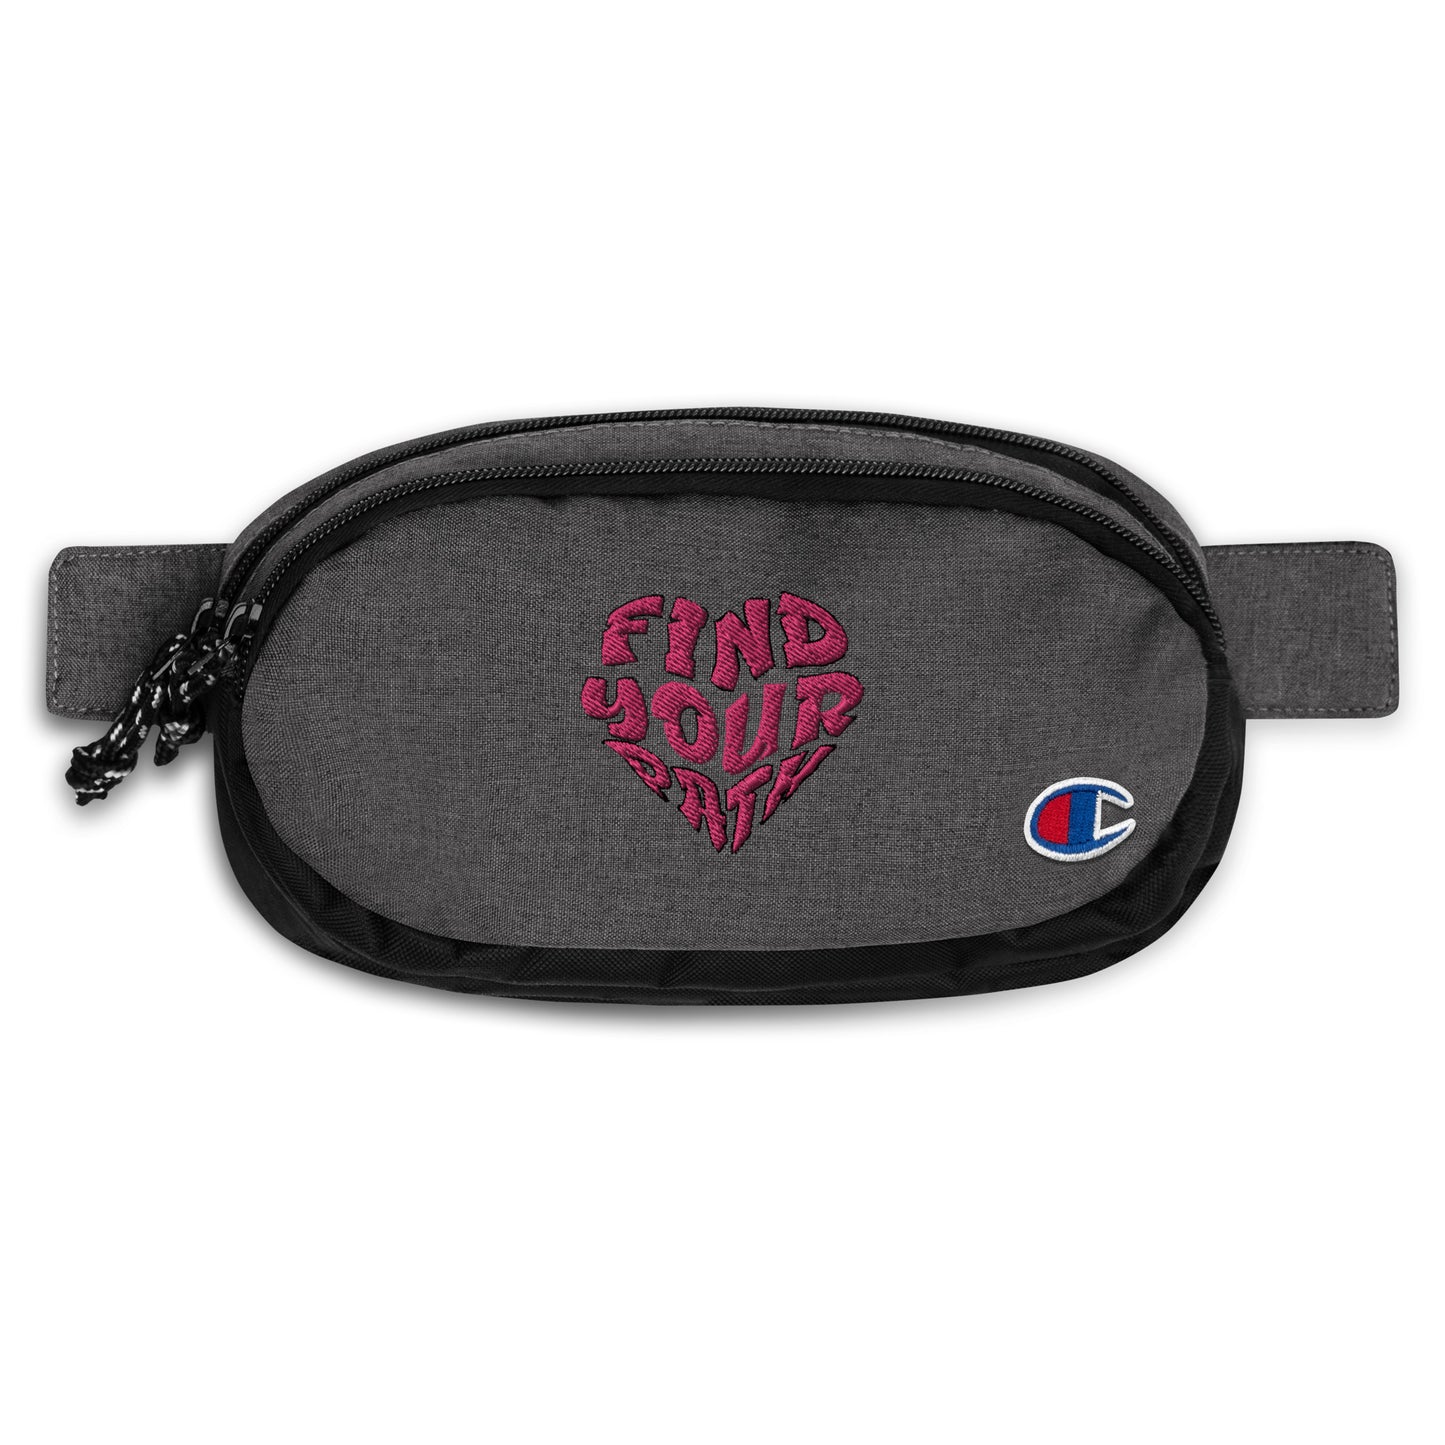 FYP Heart fanny pack